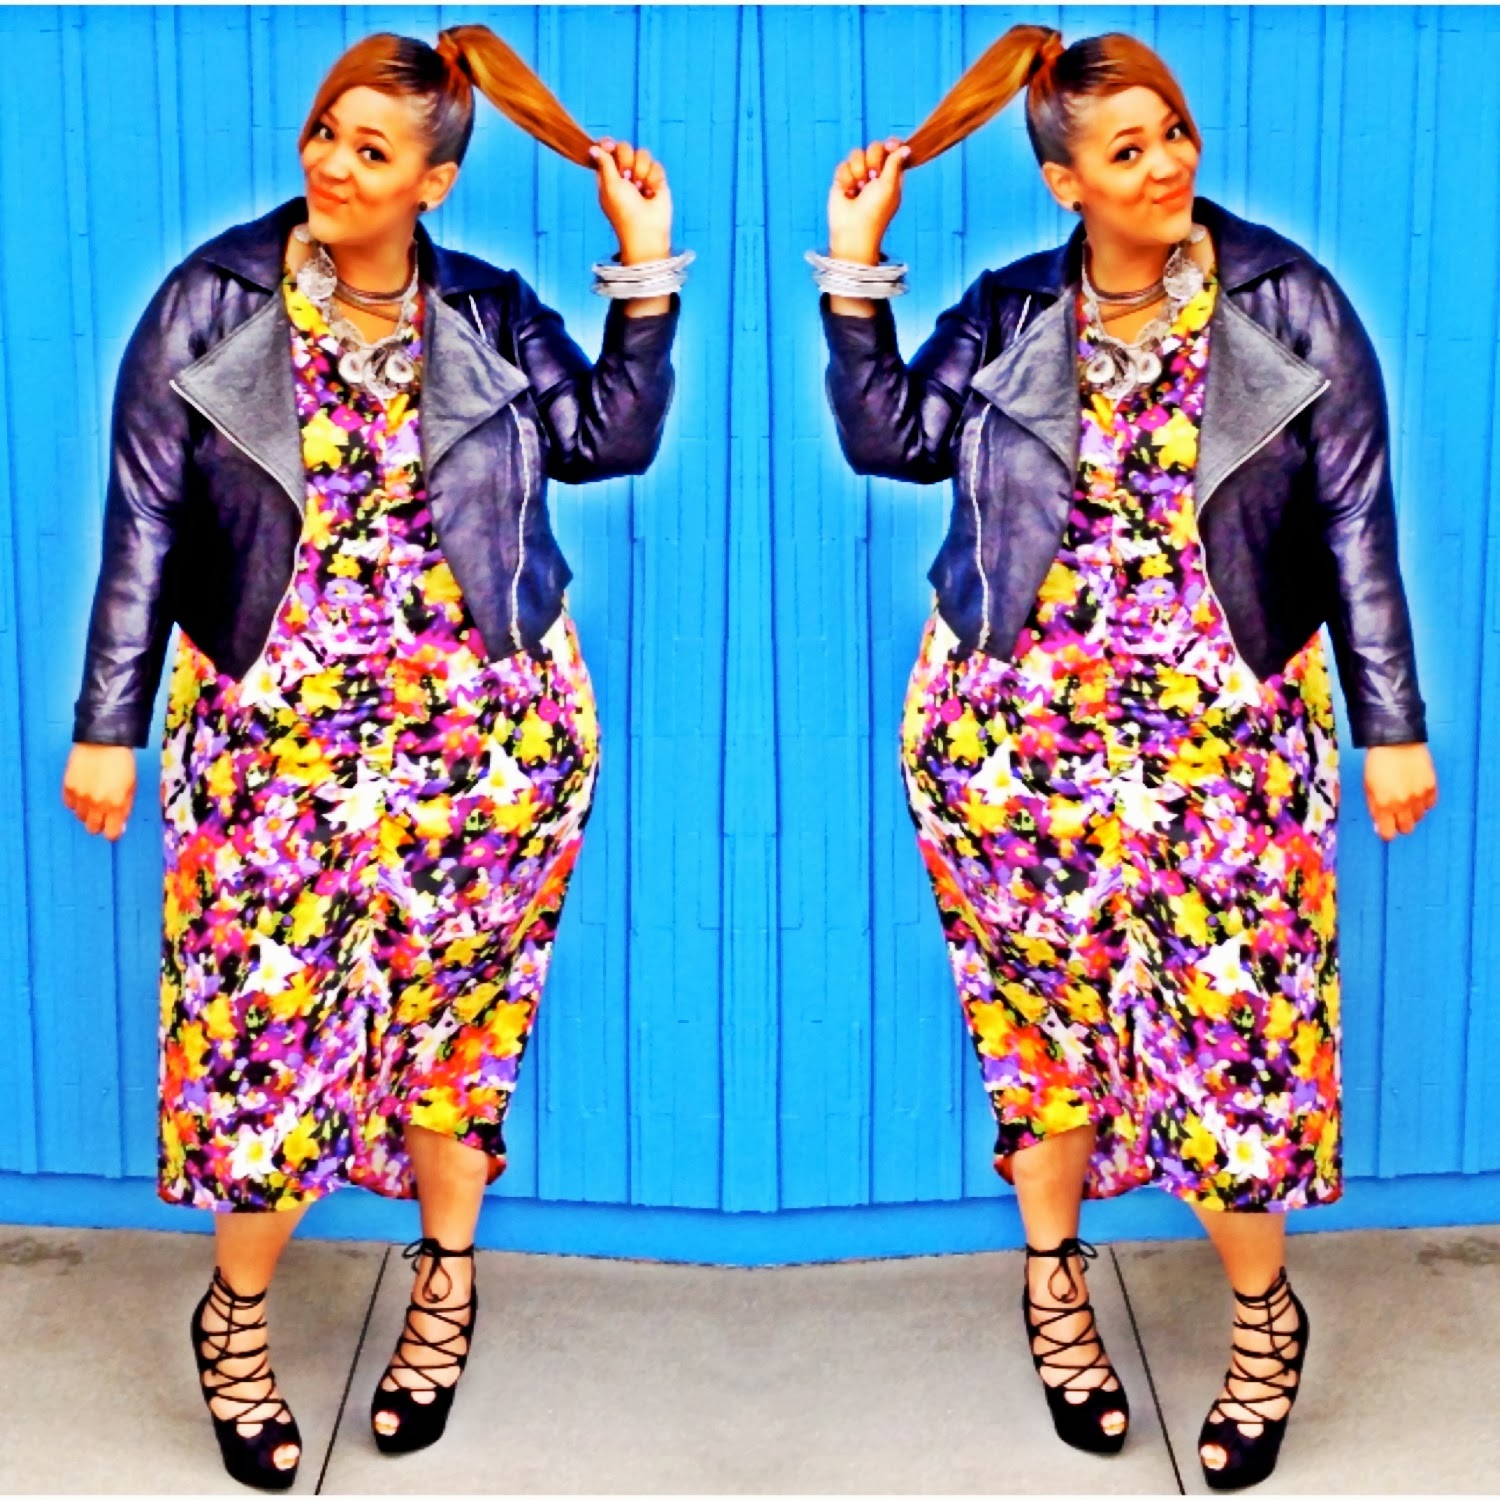 Bold Patterns For Plus Size Girls (11)